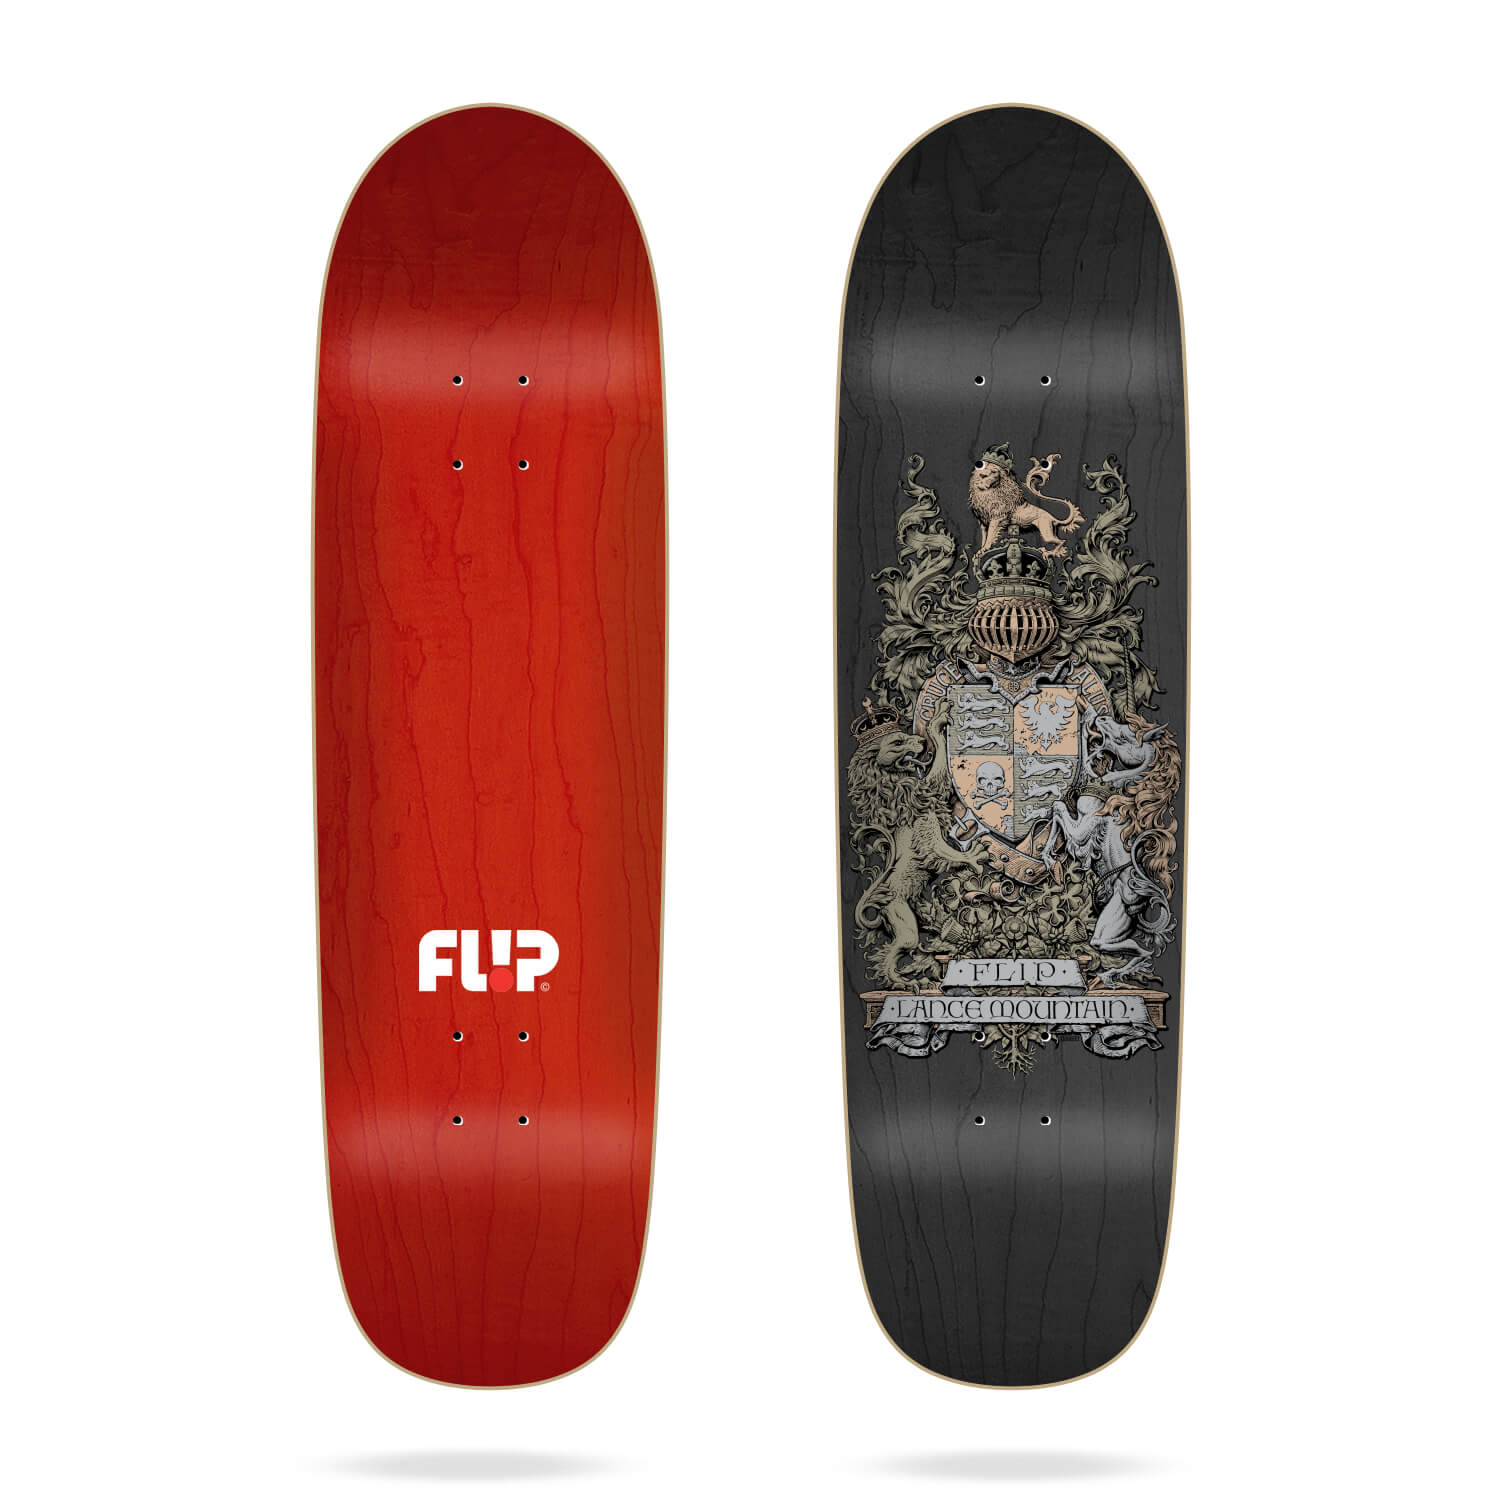 Flip Mountaint Stained Crest 8.75" deck